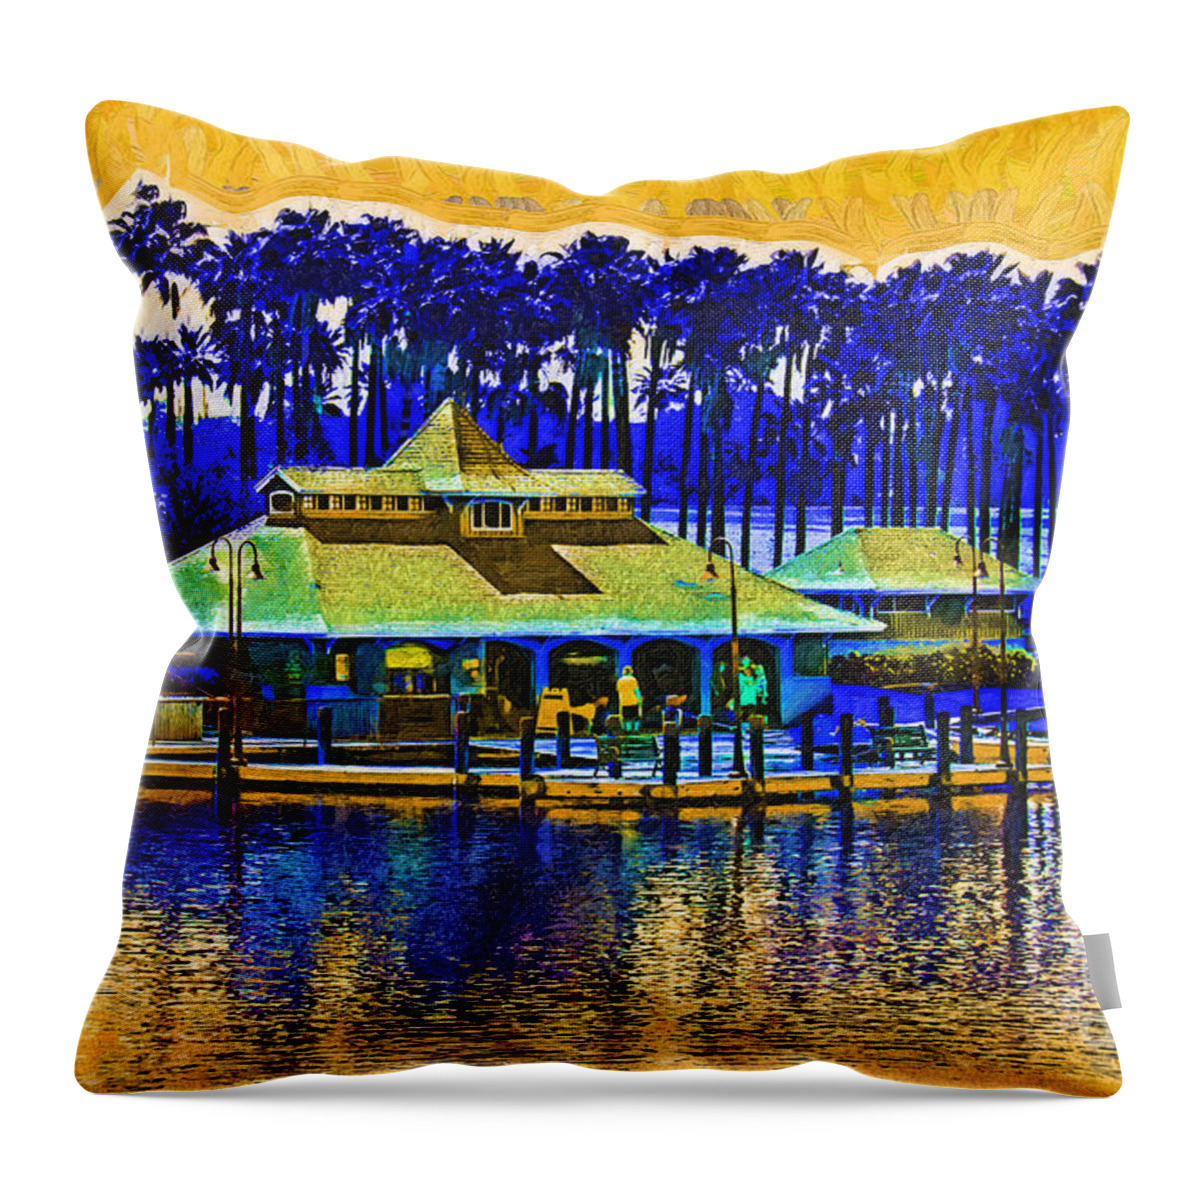 Boathouse Throw Pillow featuring the digital art Sunrise At The Boat Dock by Kirt Tisdale